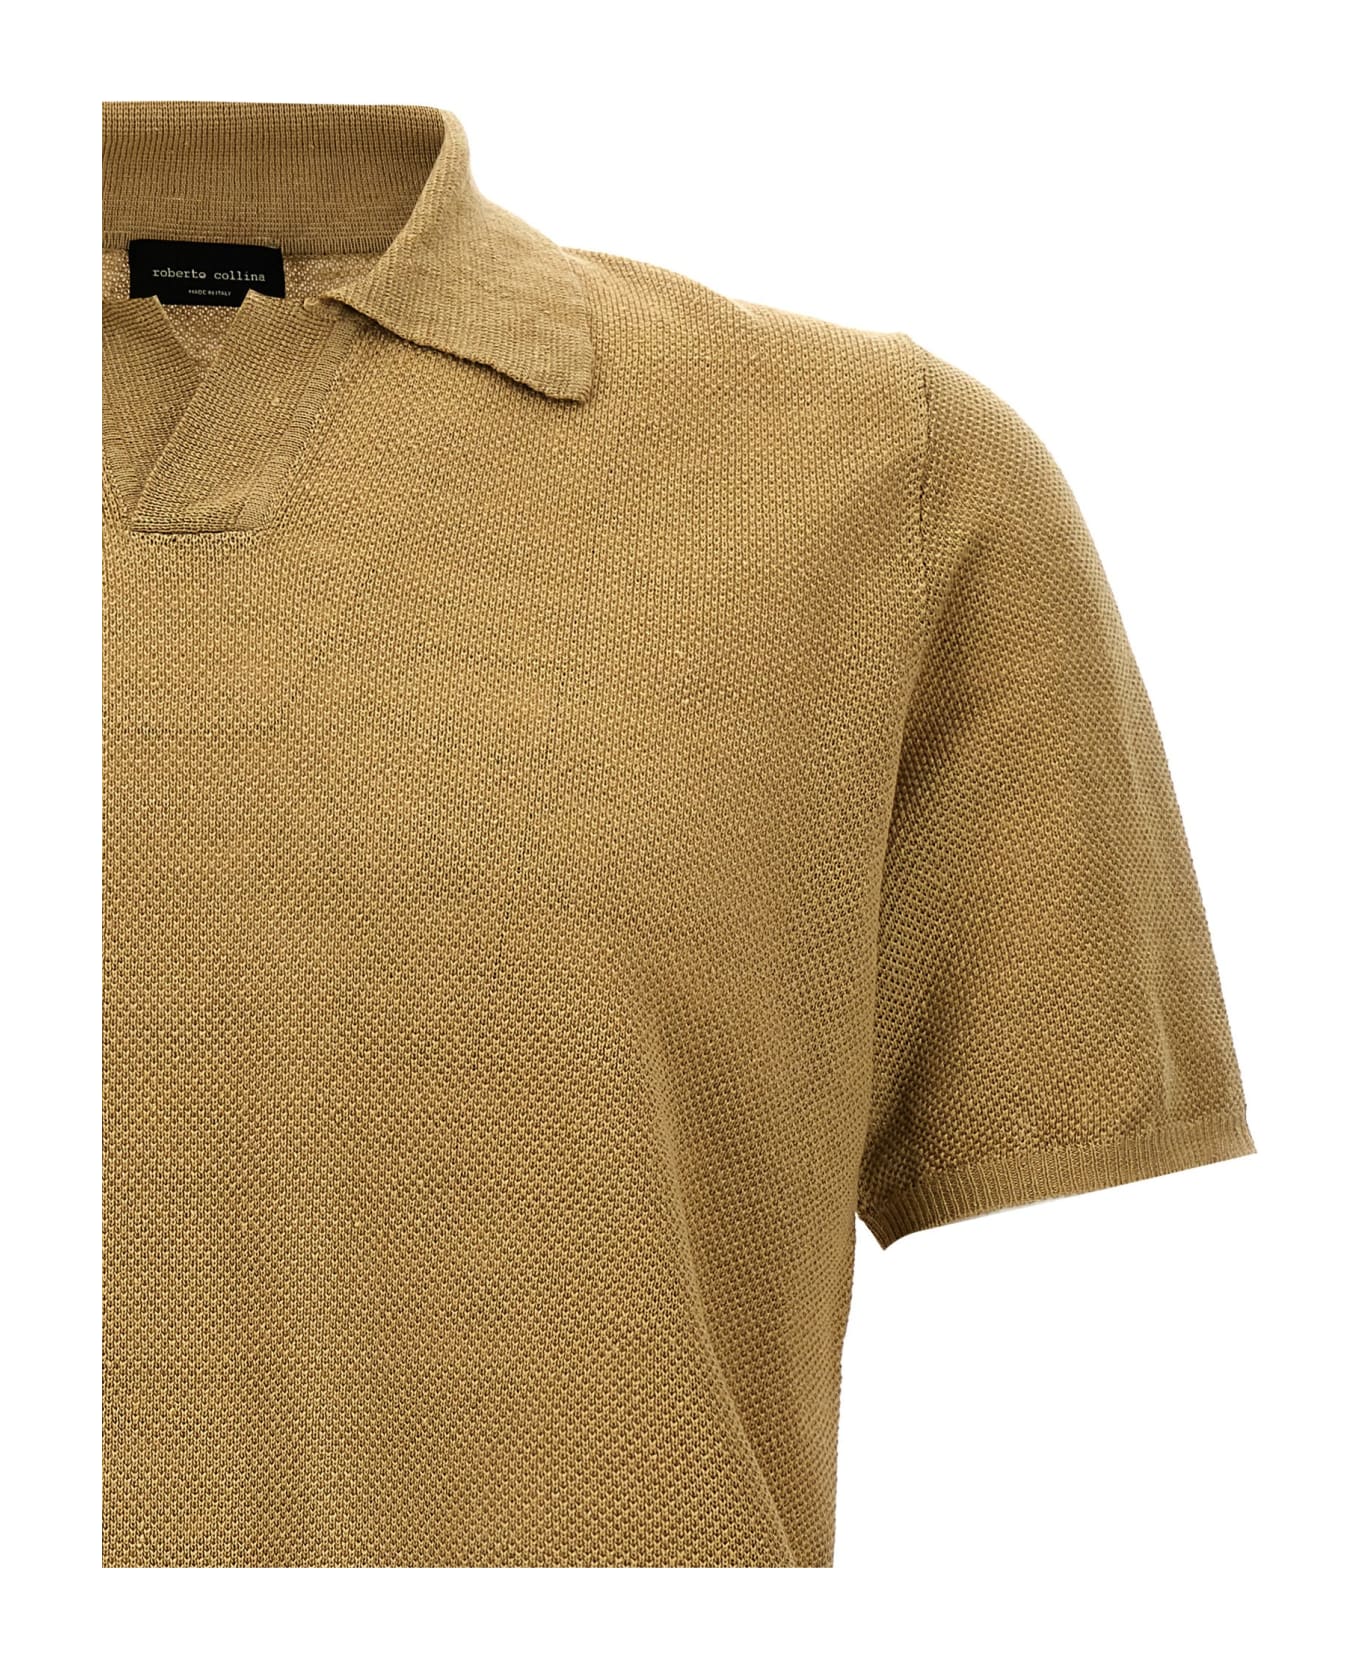 Roberto Collina Knitted Polo Shirt - Beige ポロシャツ